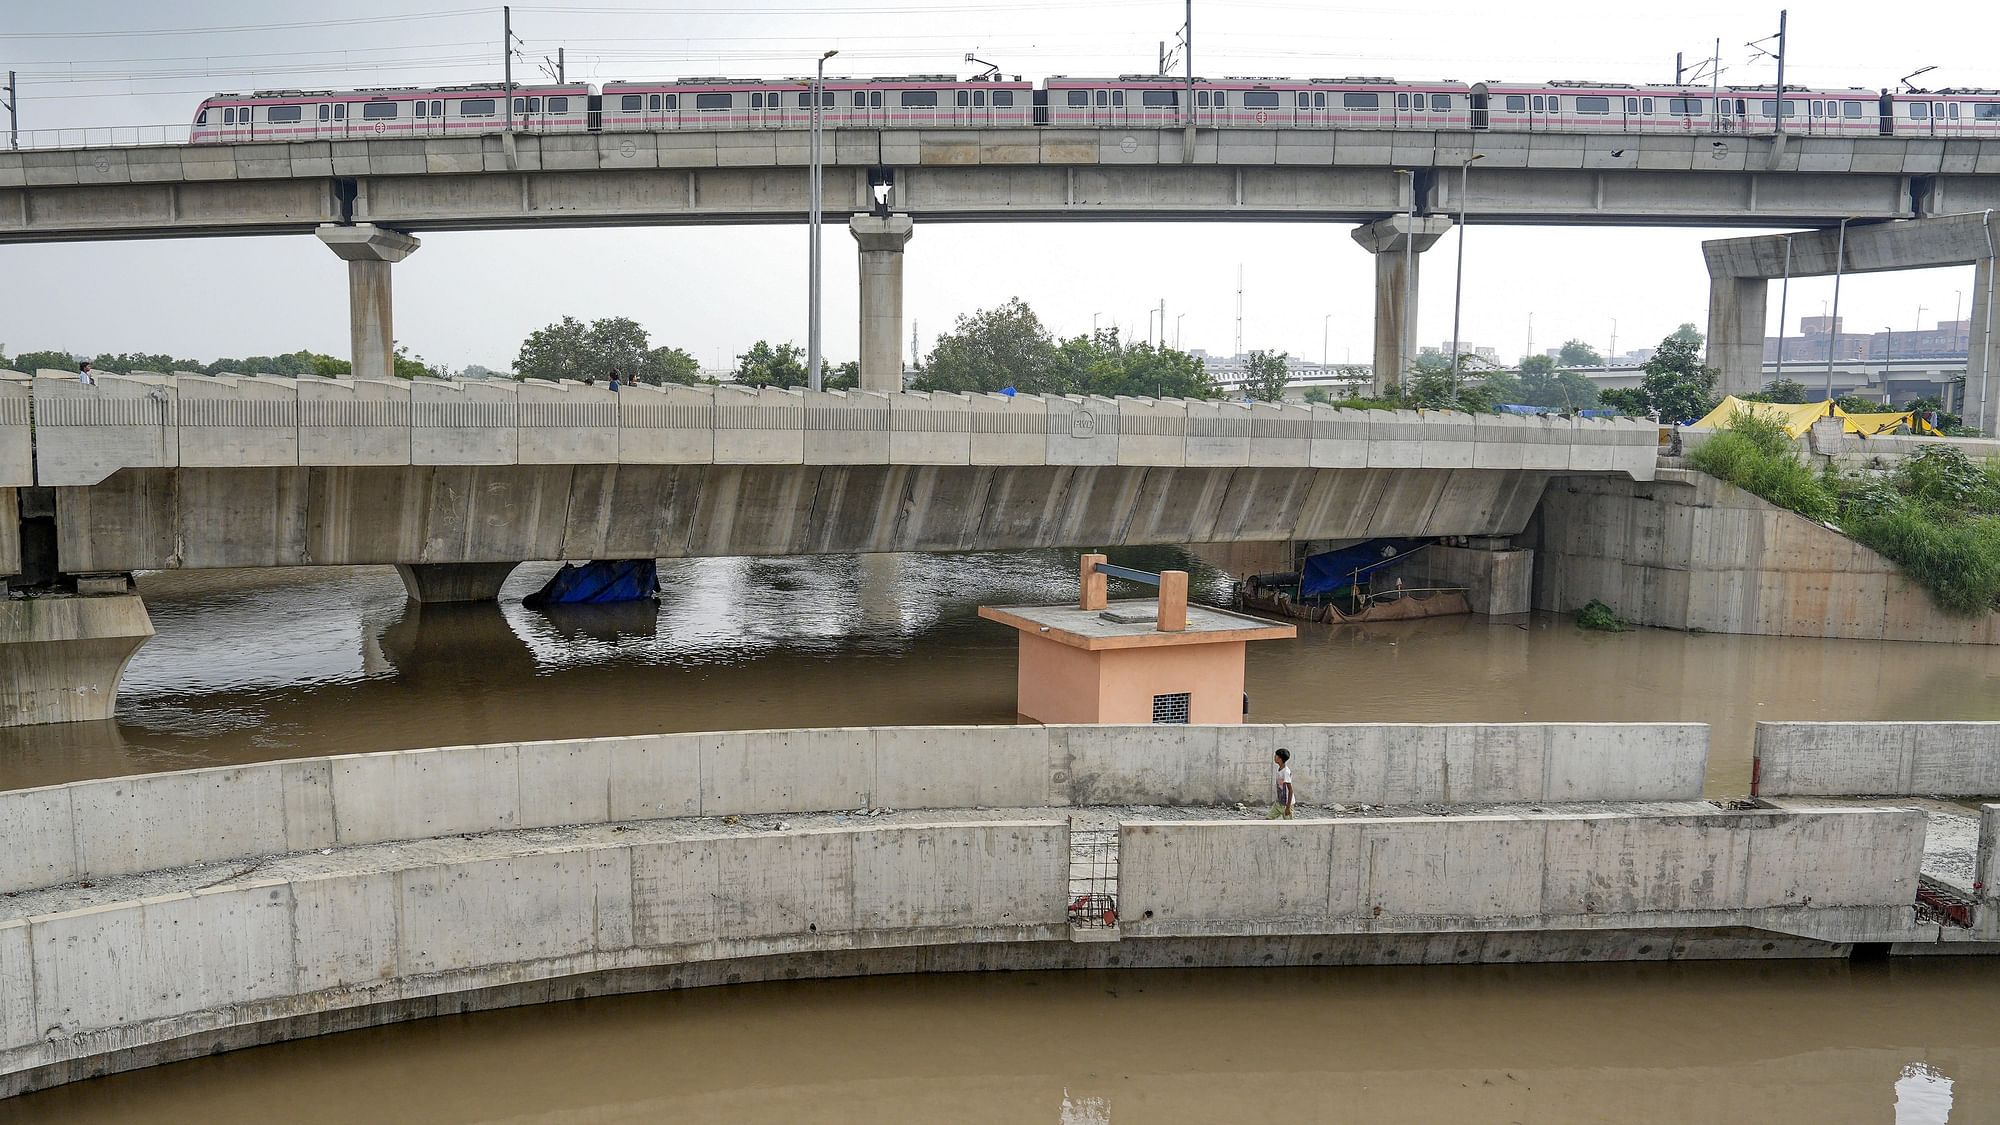 <div class="paragraphs"><p>A Delhi Metro train passes above the floodwaters of the swollen Yamuna river at Mayur Vihar in New Delhi on Wednesday, 12 July.</p></div>